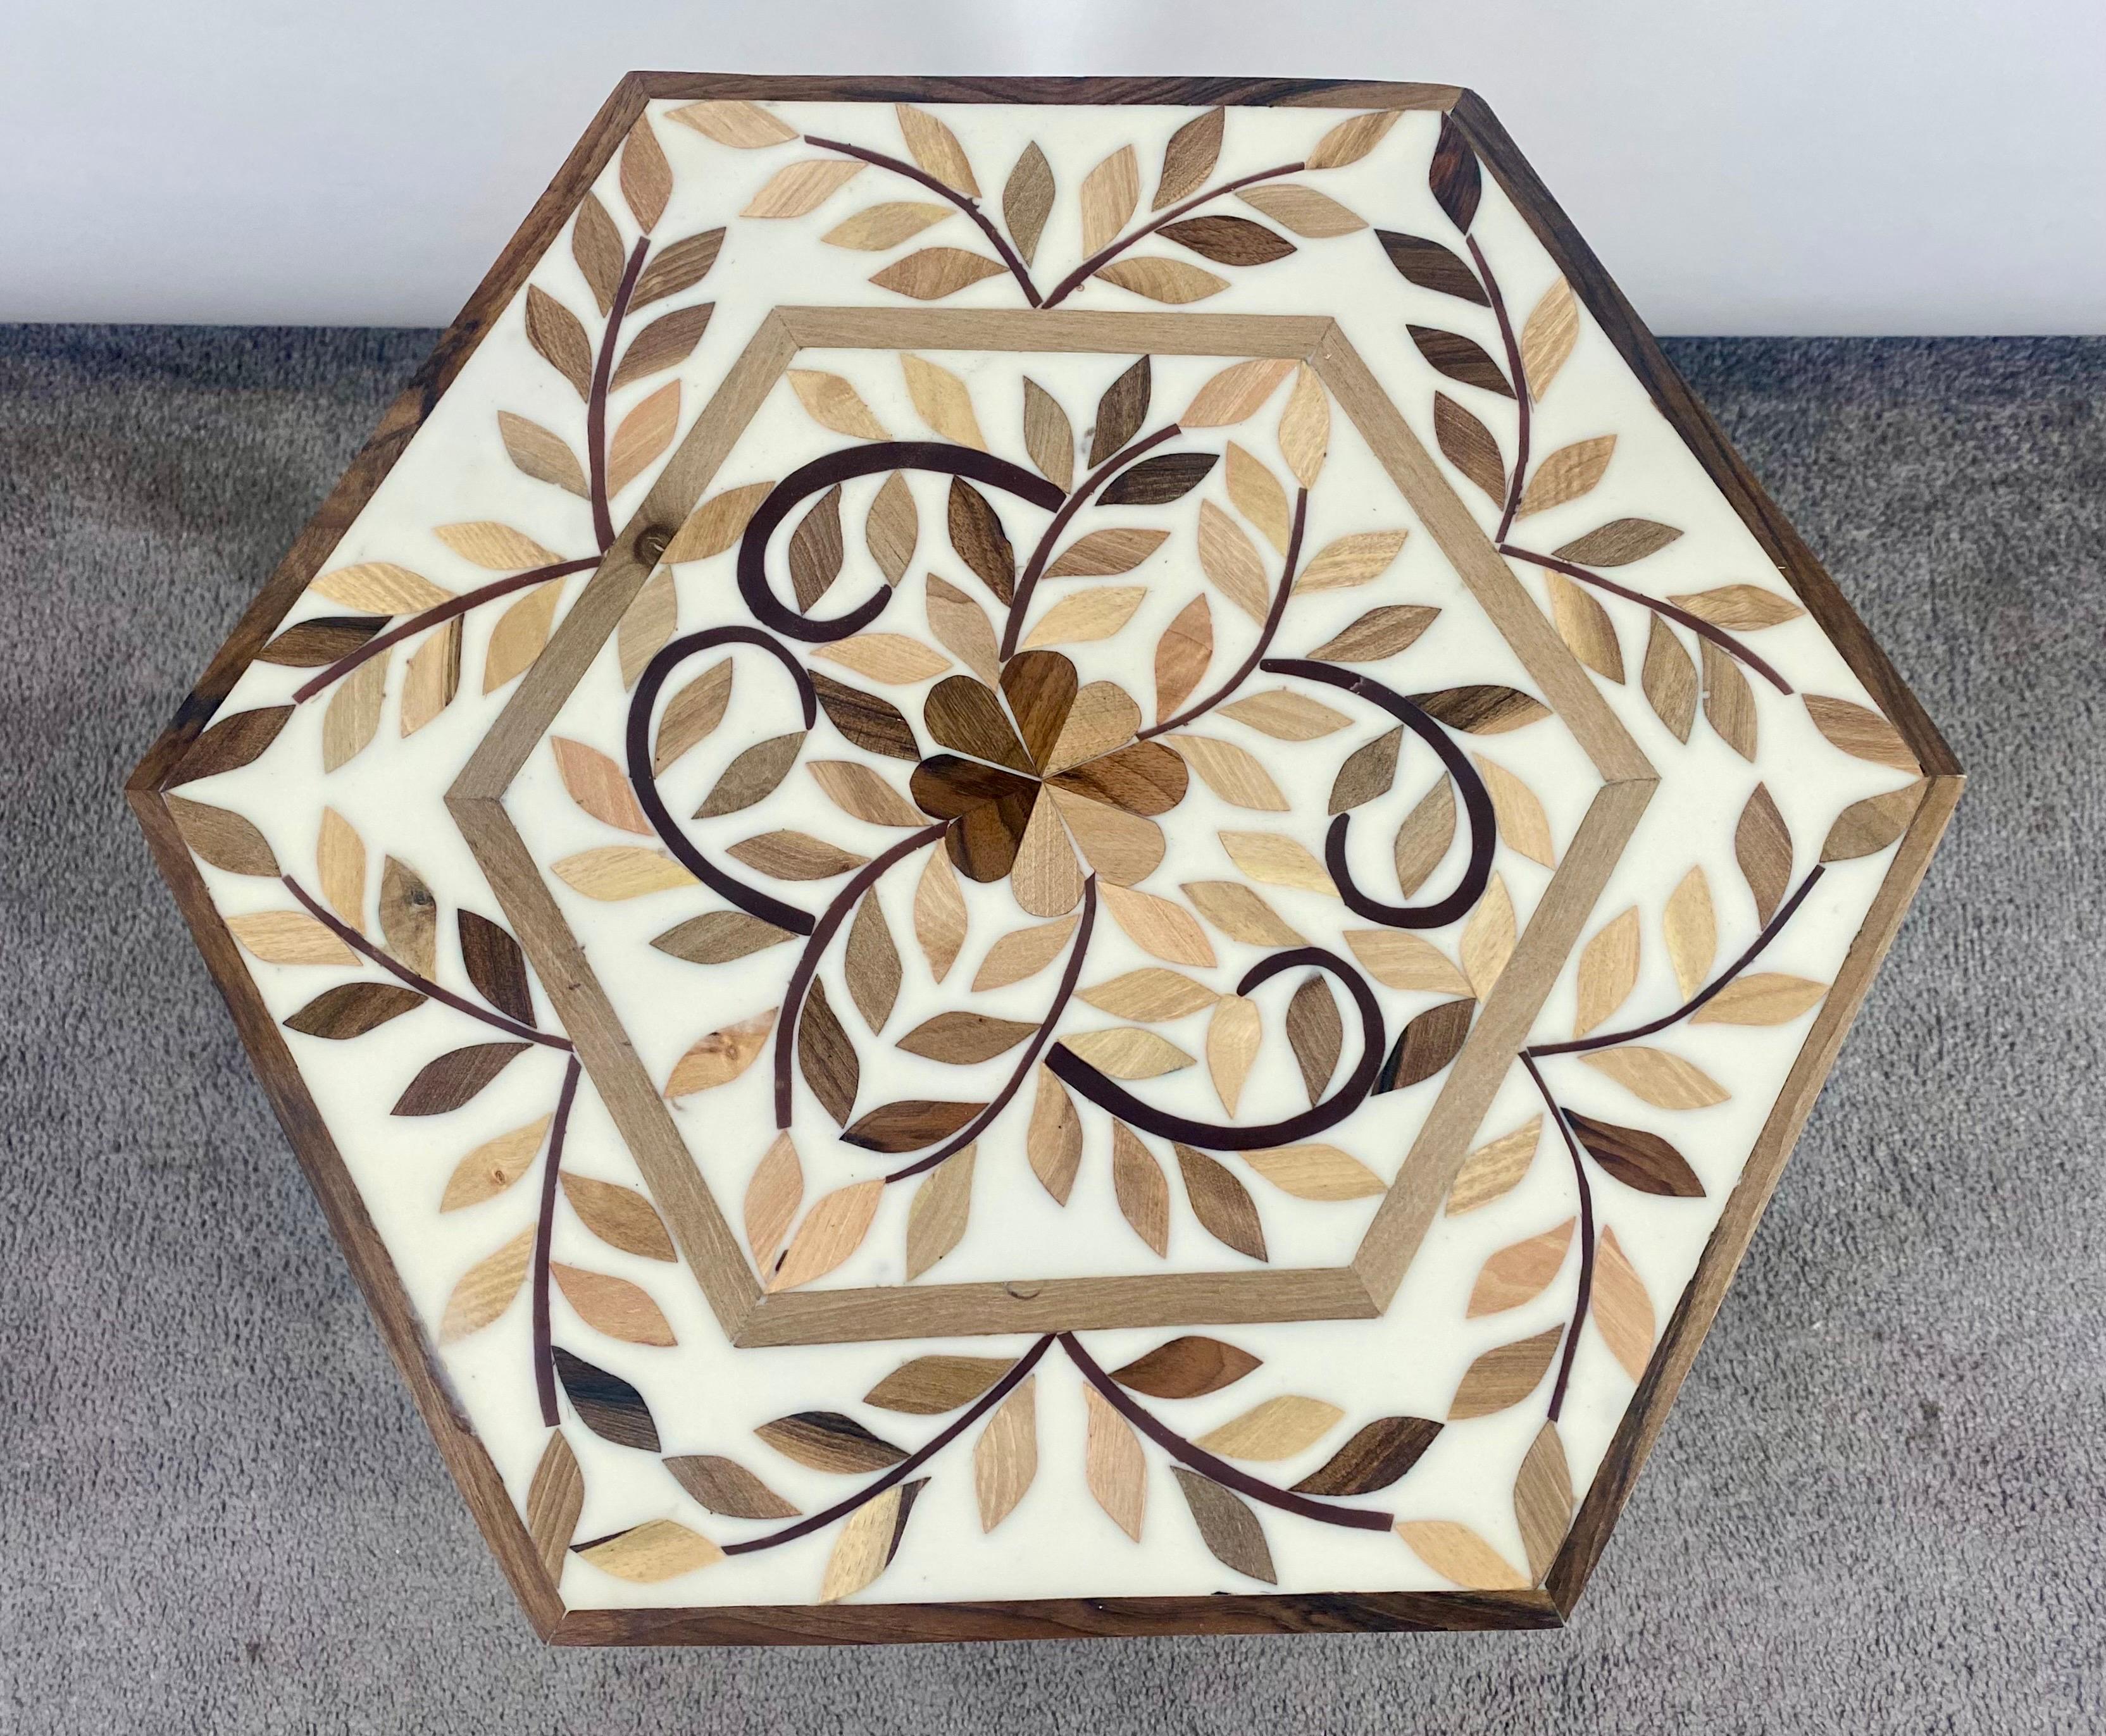 Moroccan Boho Chic Leaf Design Resin & Walnut Hexagonal Side or End Table, Pair For Sale 1